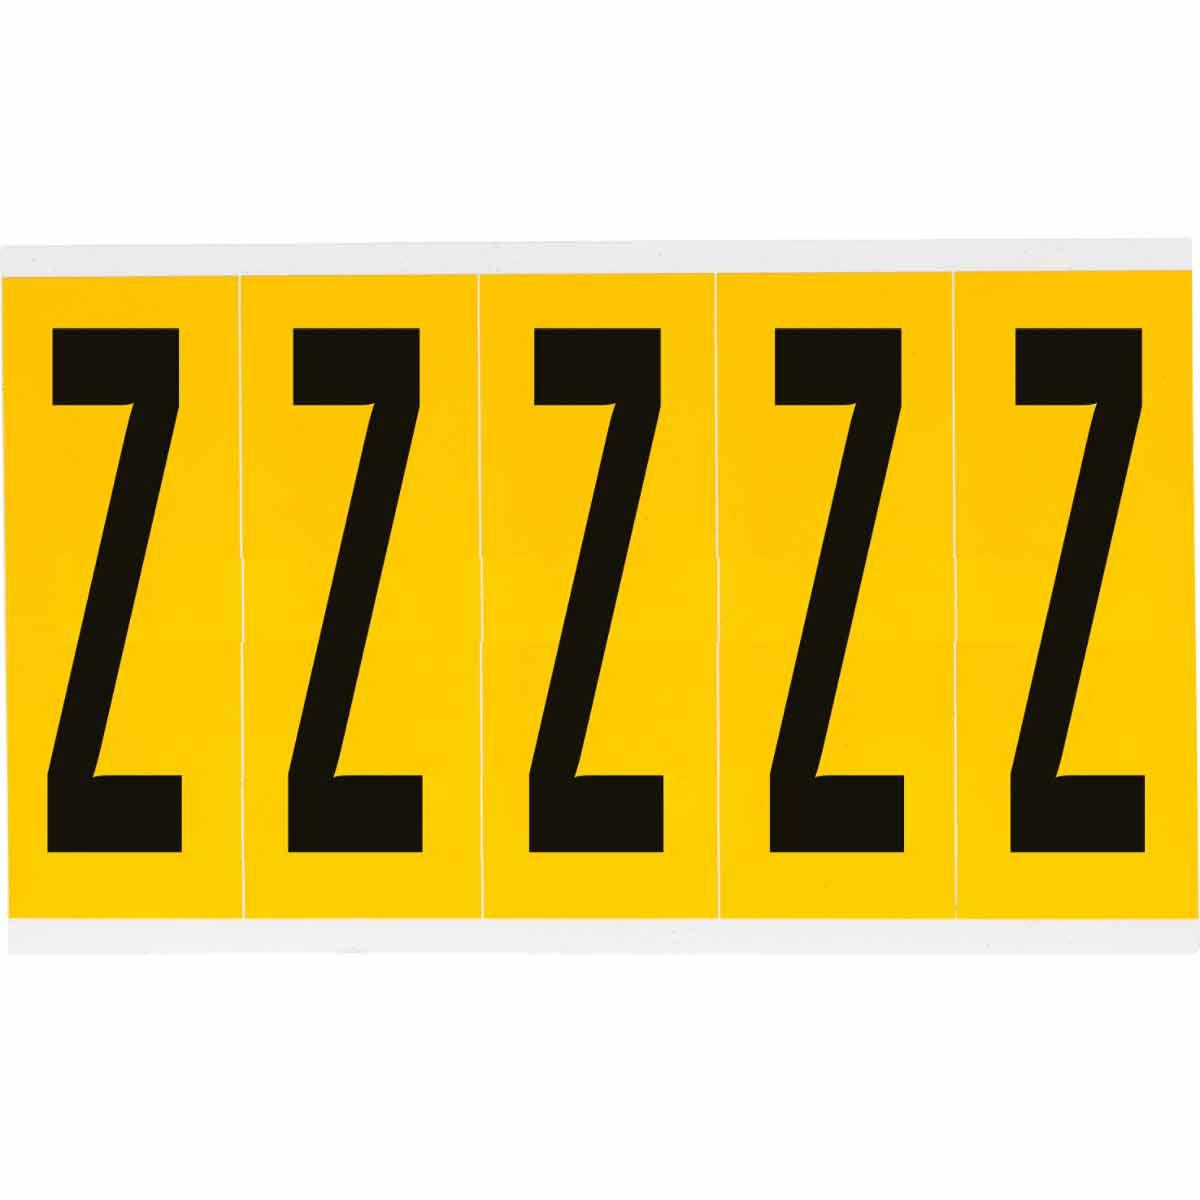 Brady® 1560-2 Non-Reflective Standard Number Label, Black 2 Character, 3-7/8 in H x 1.356 in W, Yellow Background, B-946 Vinyl